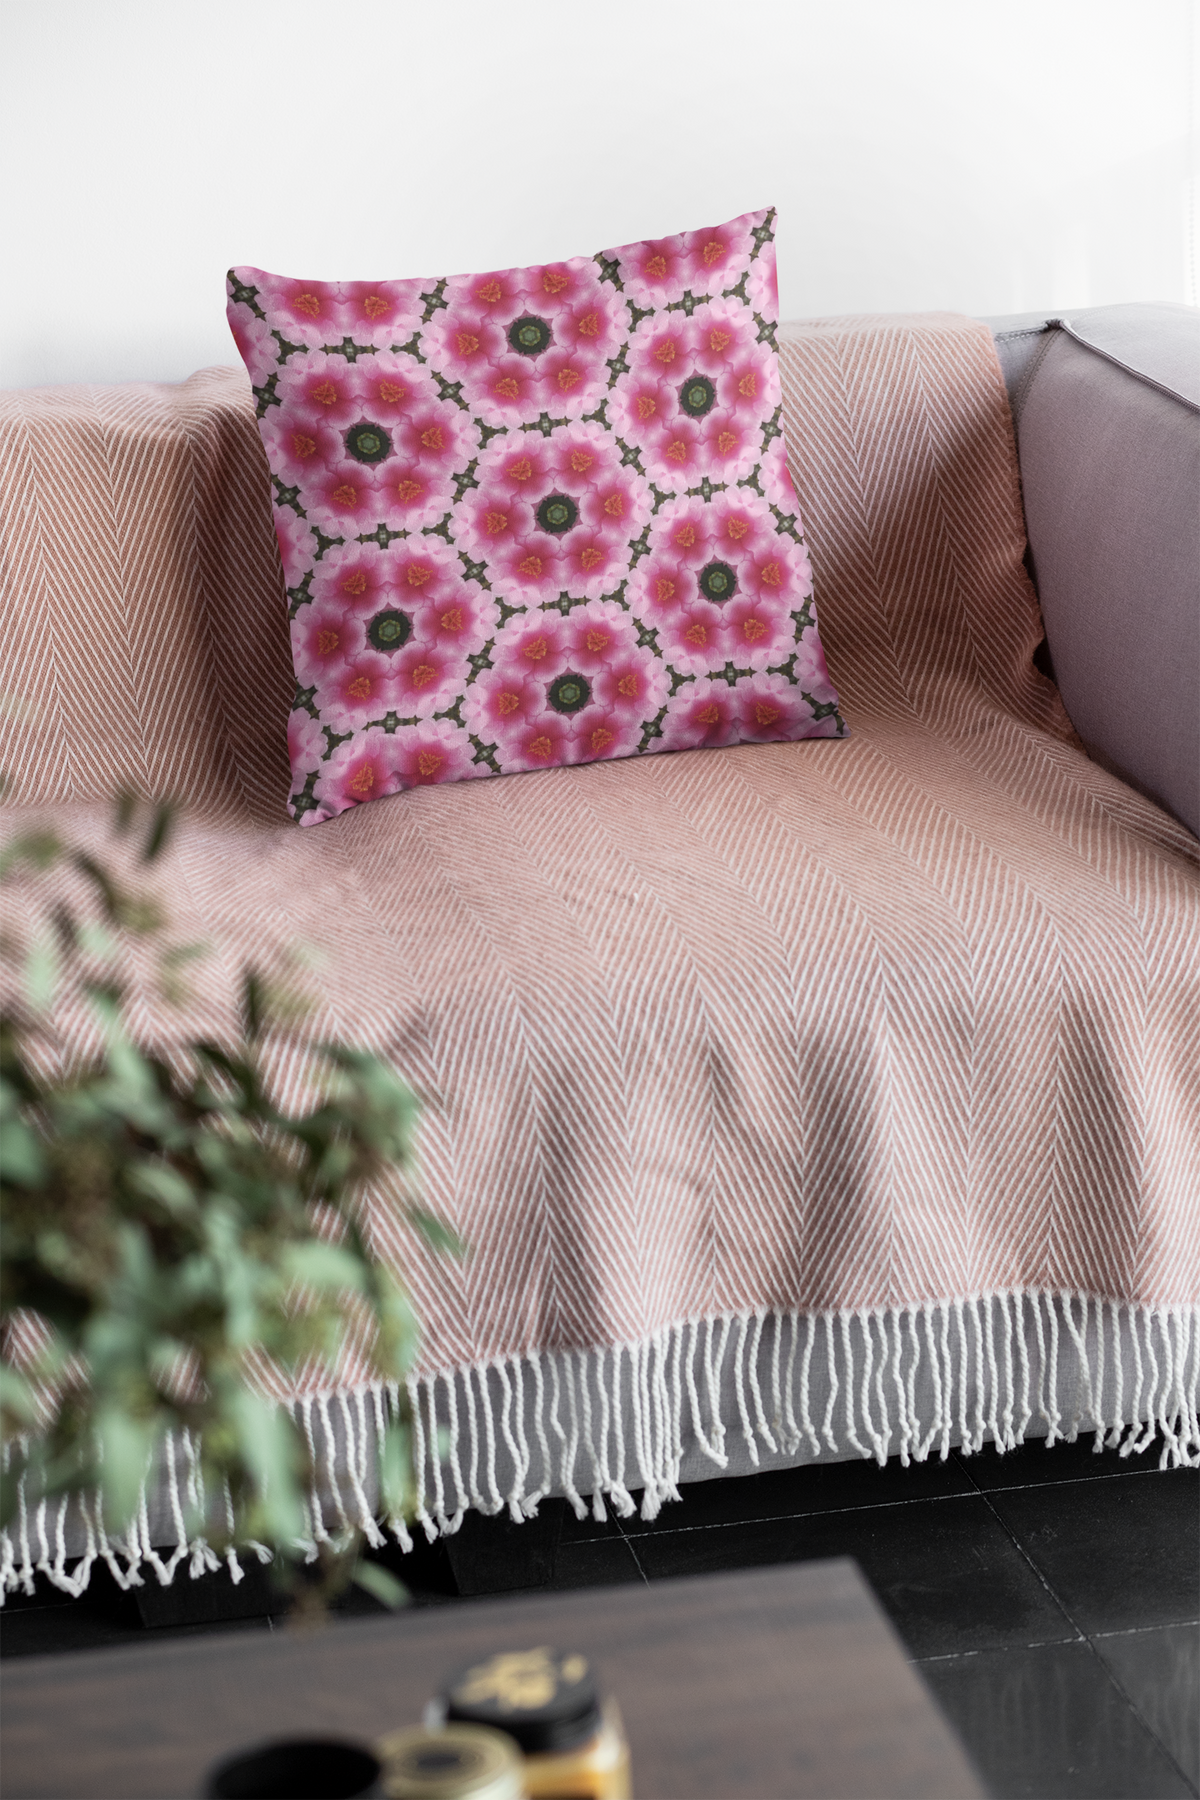 Honeycomb Pink Camellia Square Pillow